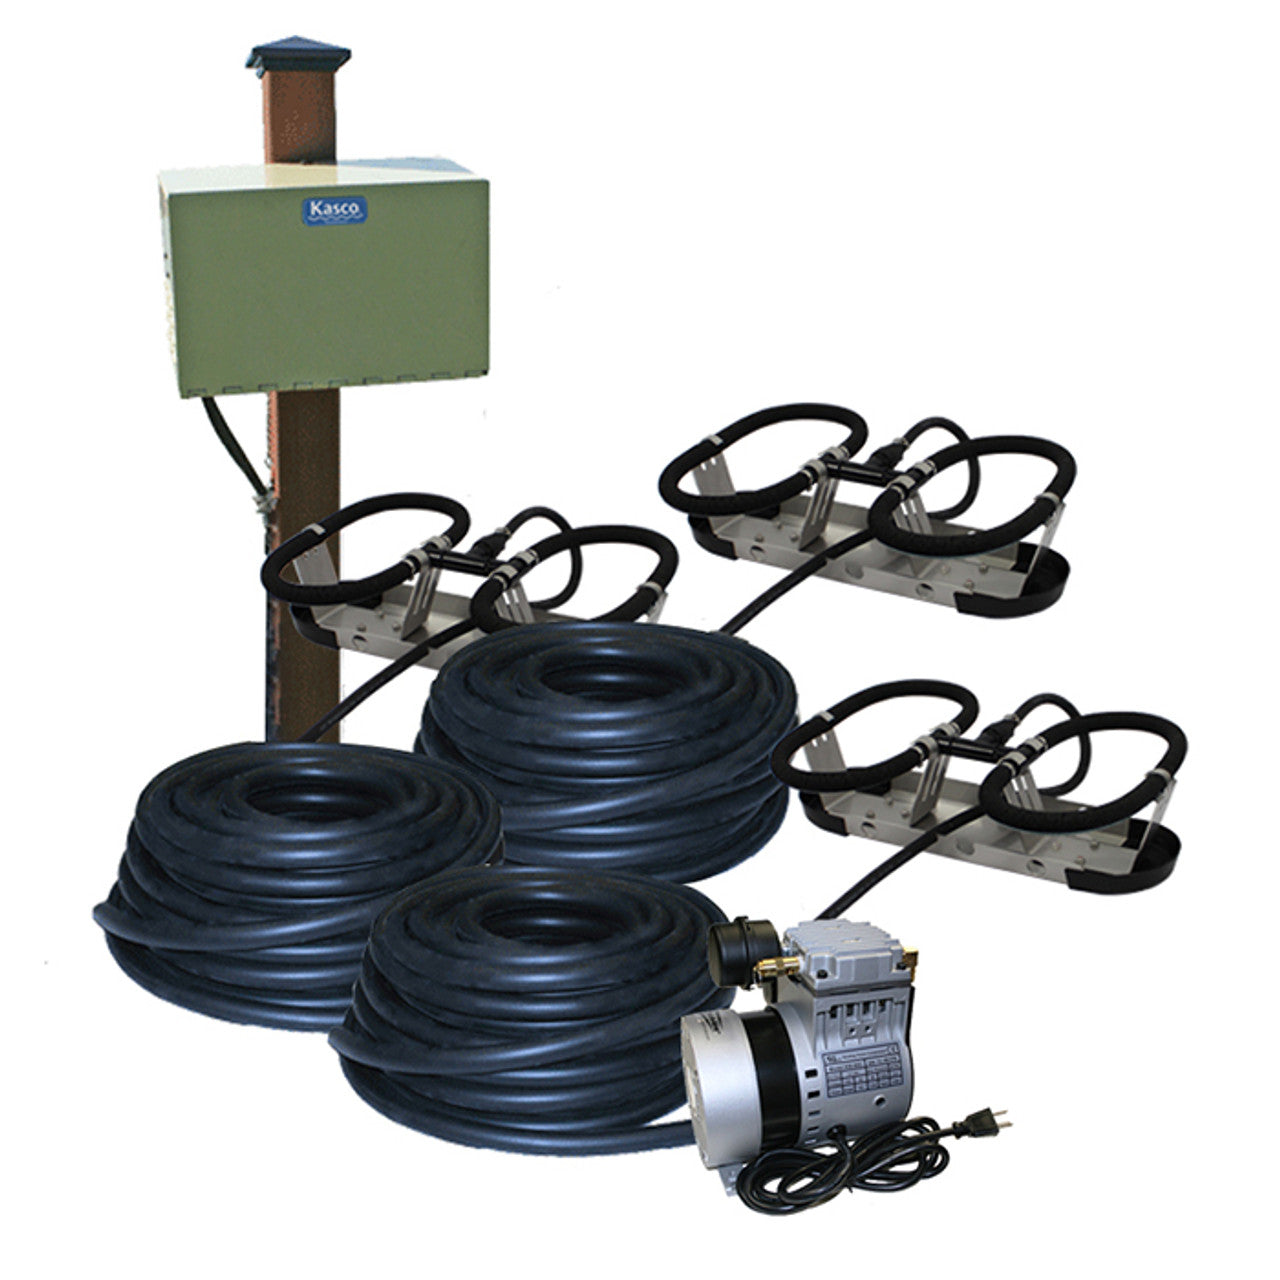 Kasco Robust-Aire Aeration System - 3 Diffusers